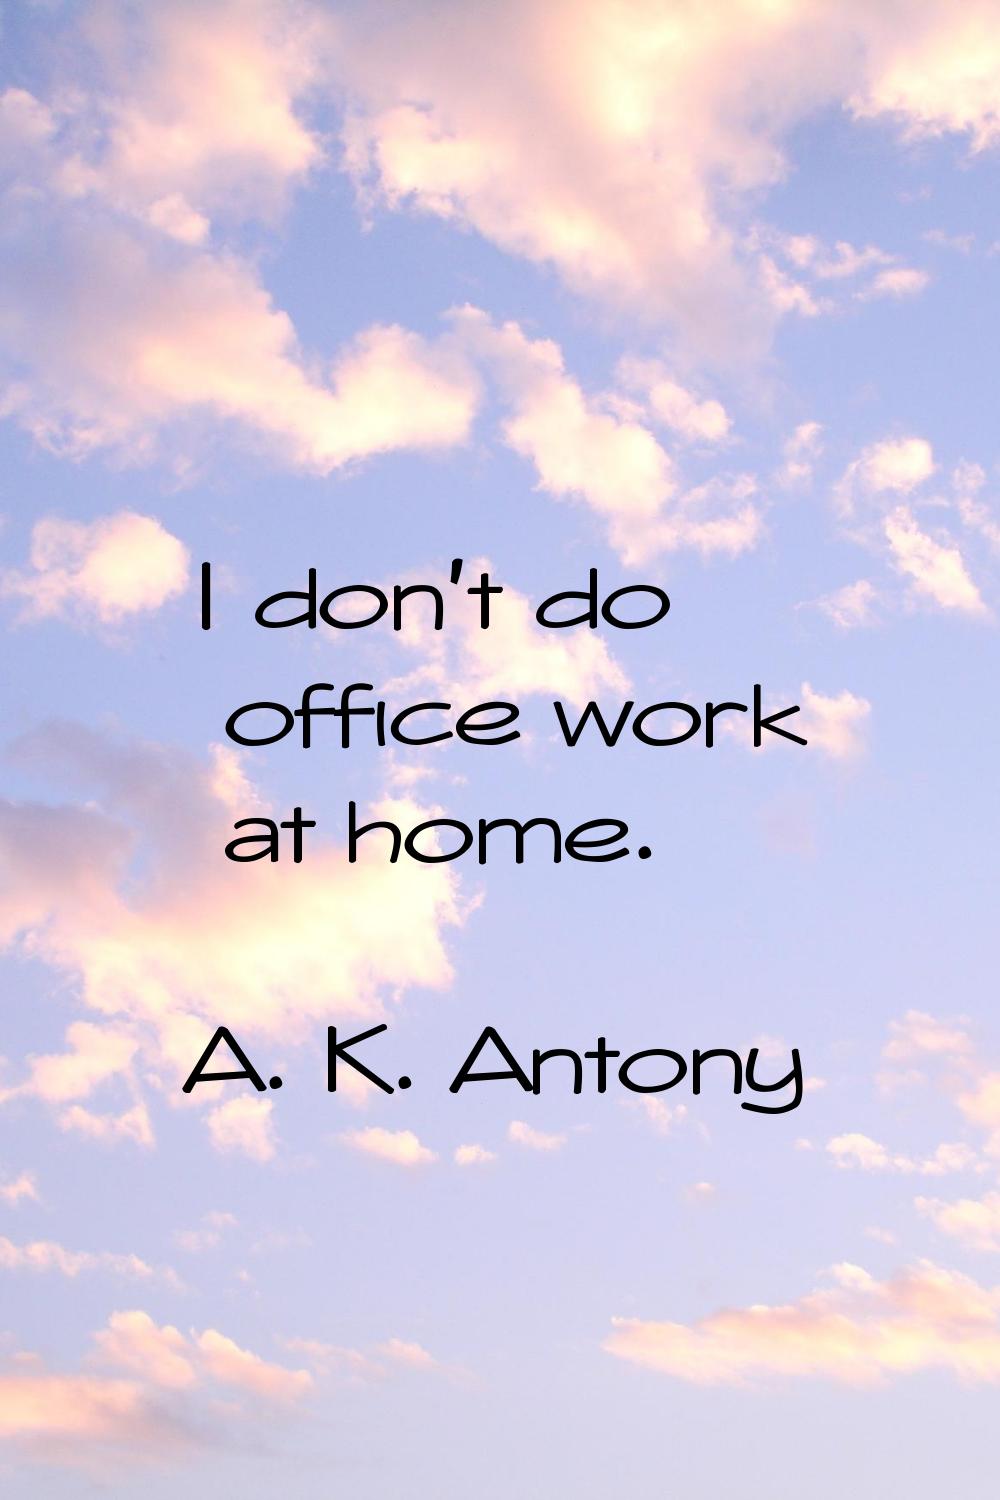 I don't do office work at home.